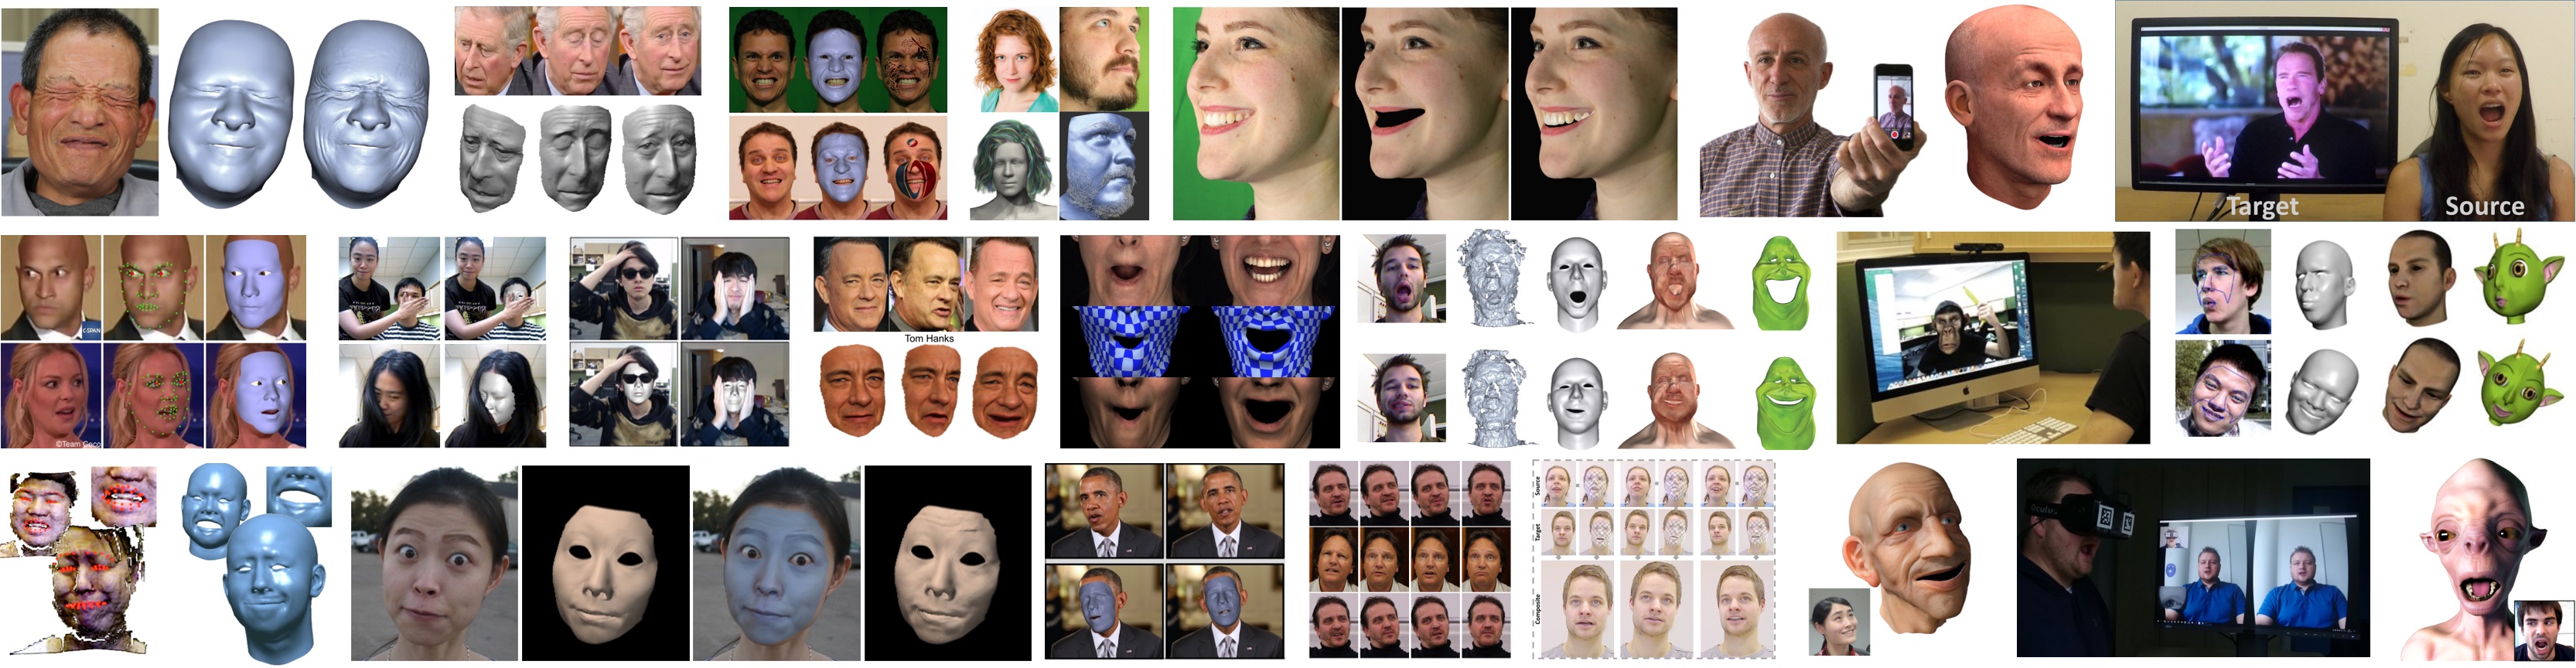 ECCV 2018: Tutorial on Face Tracking and its Applications